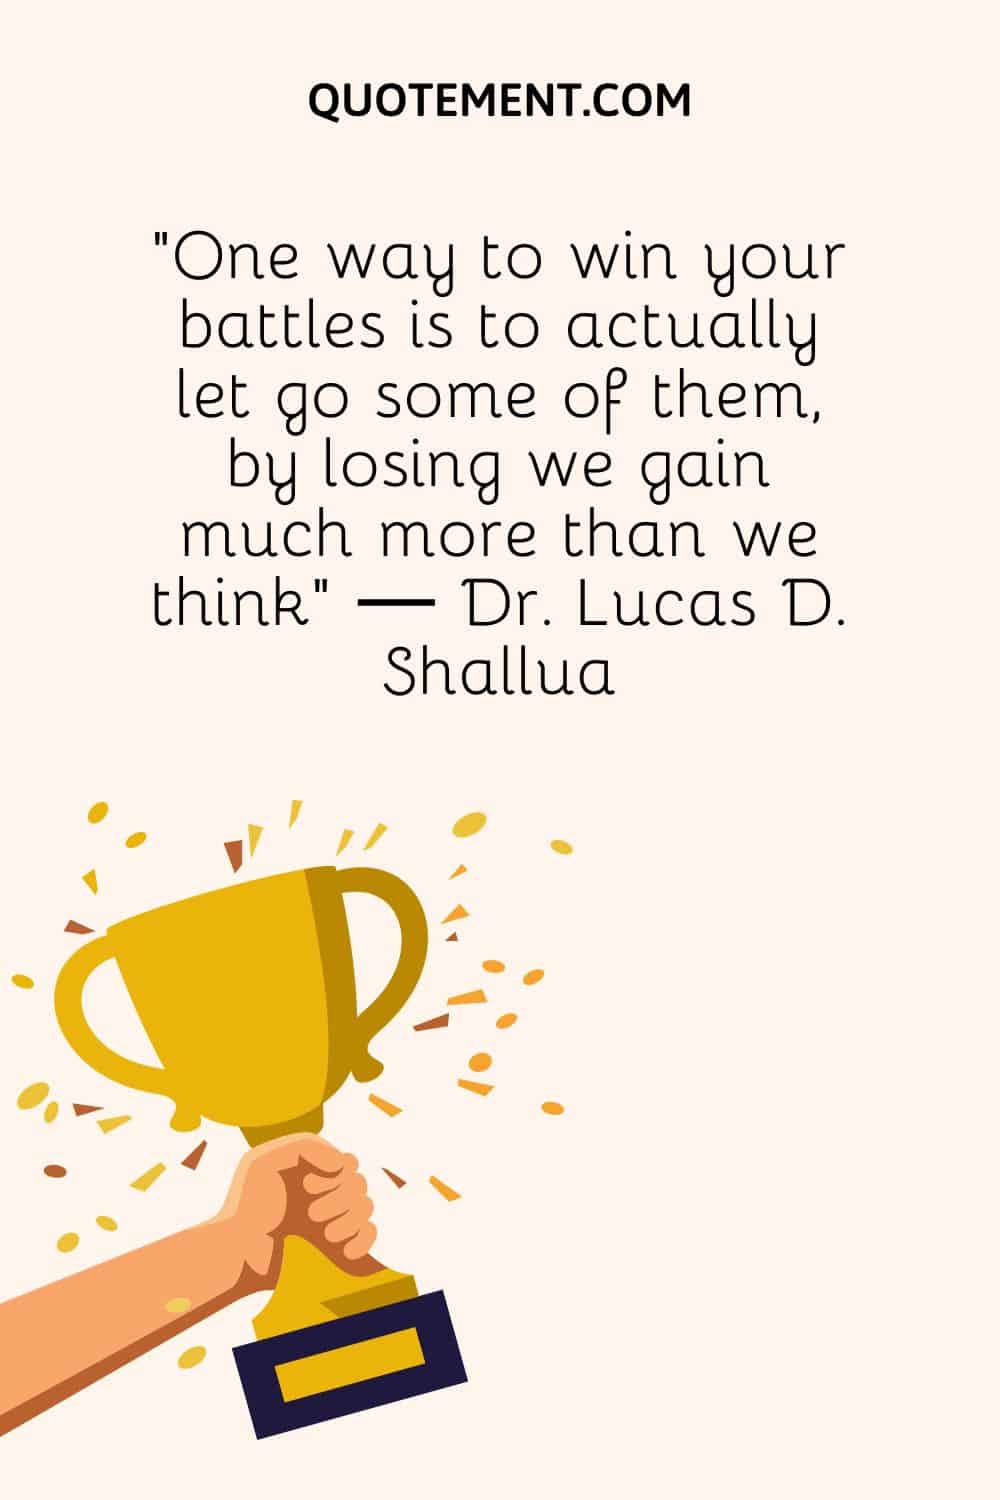 “One way to win your battles is to actually let go some of them, by losing we gain much more than we think” ― Dr. Lucas D. Shallua